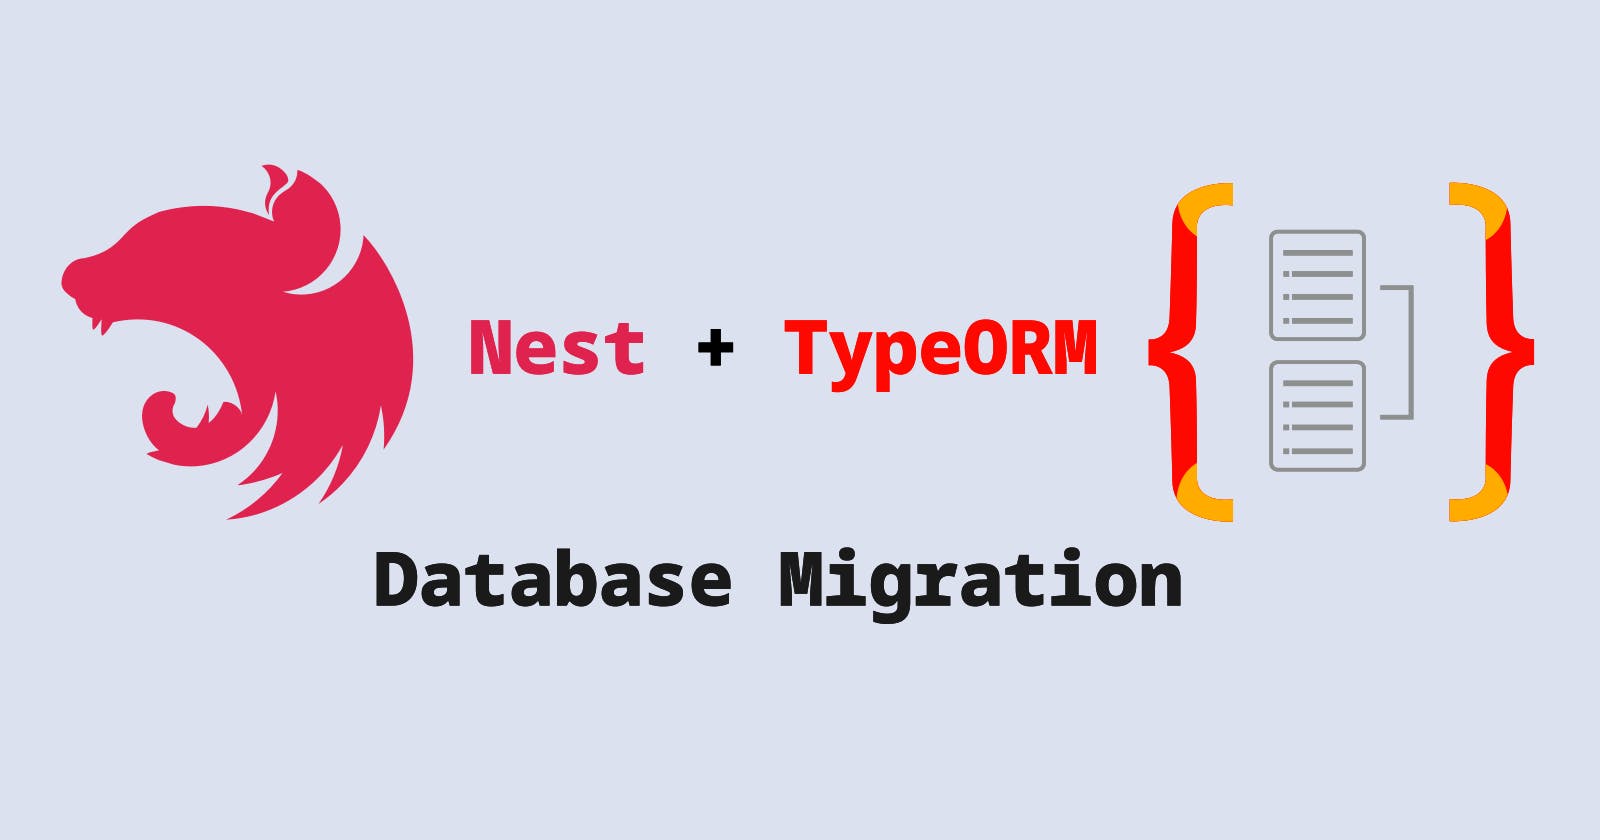 How to setup TypeORM migrations in a NestJS project